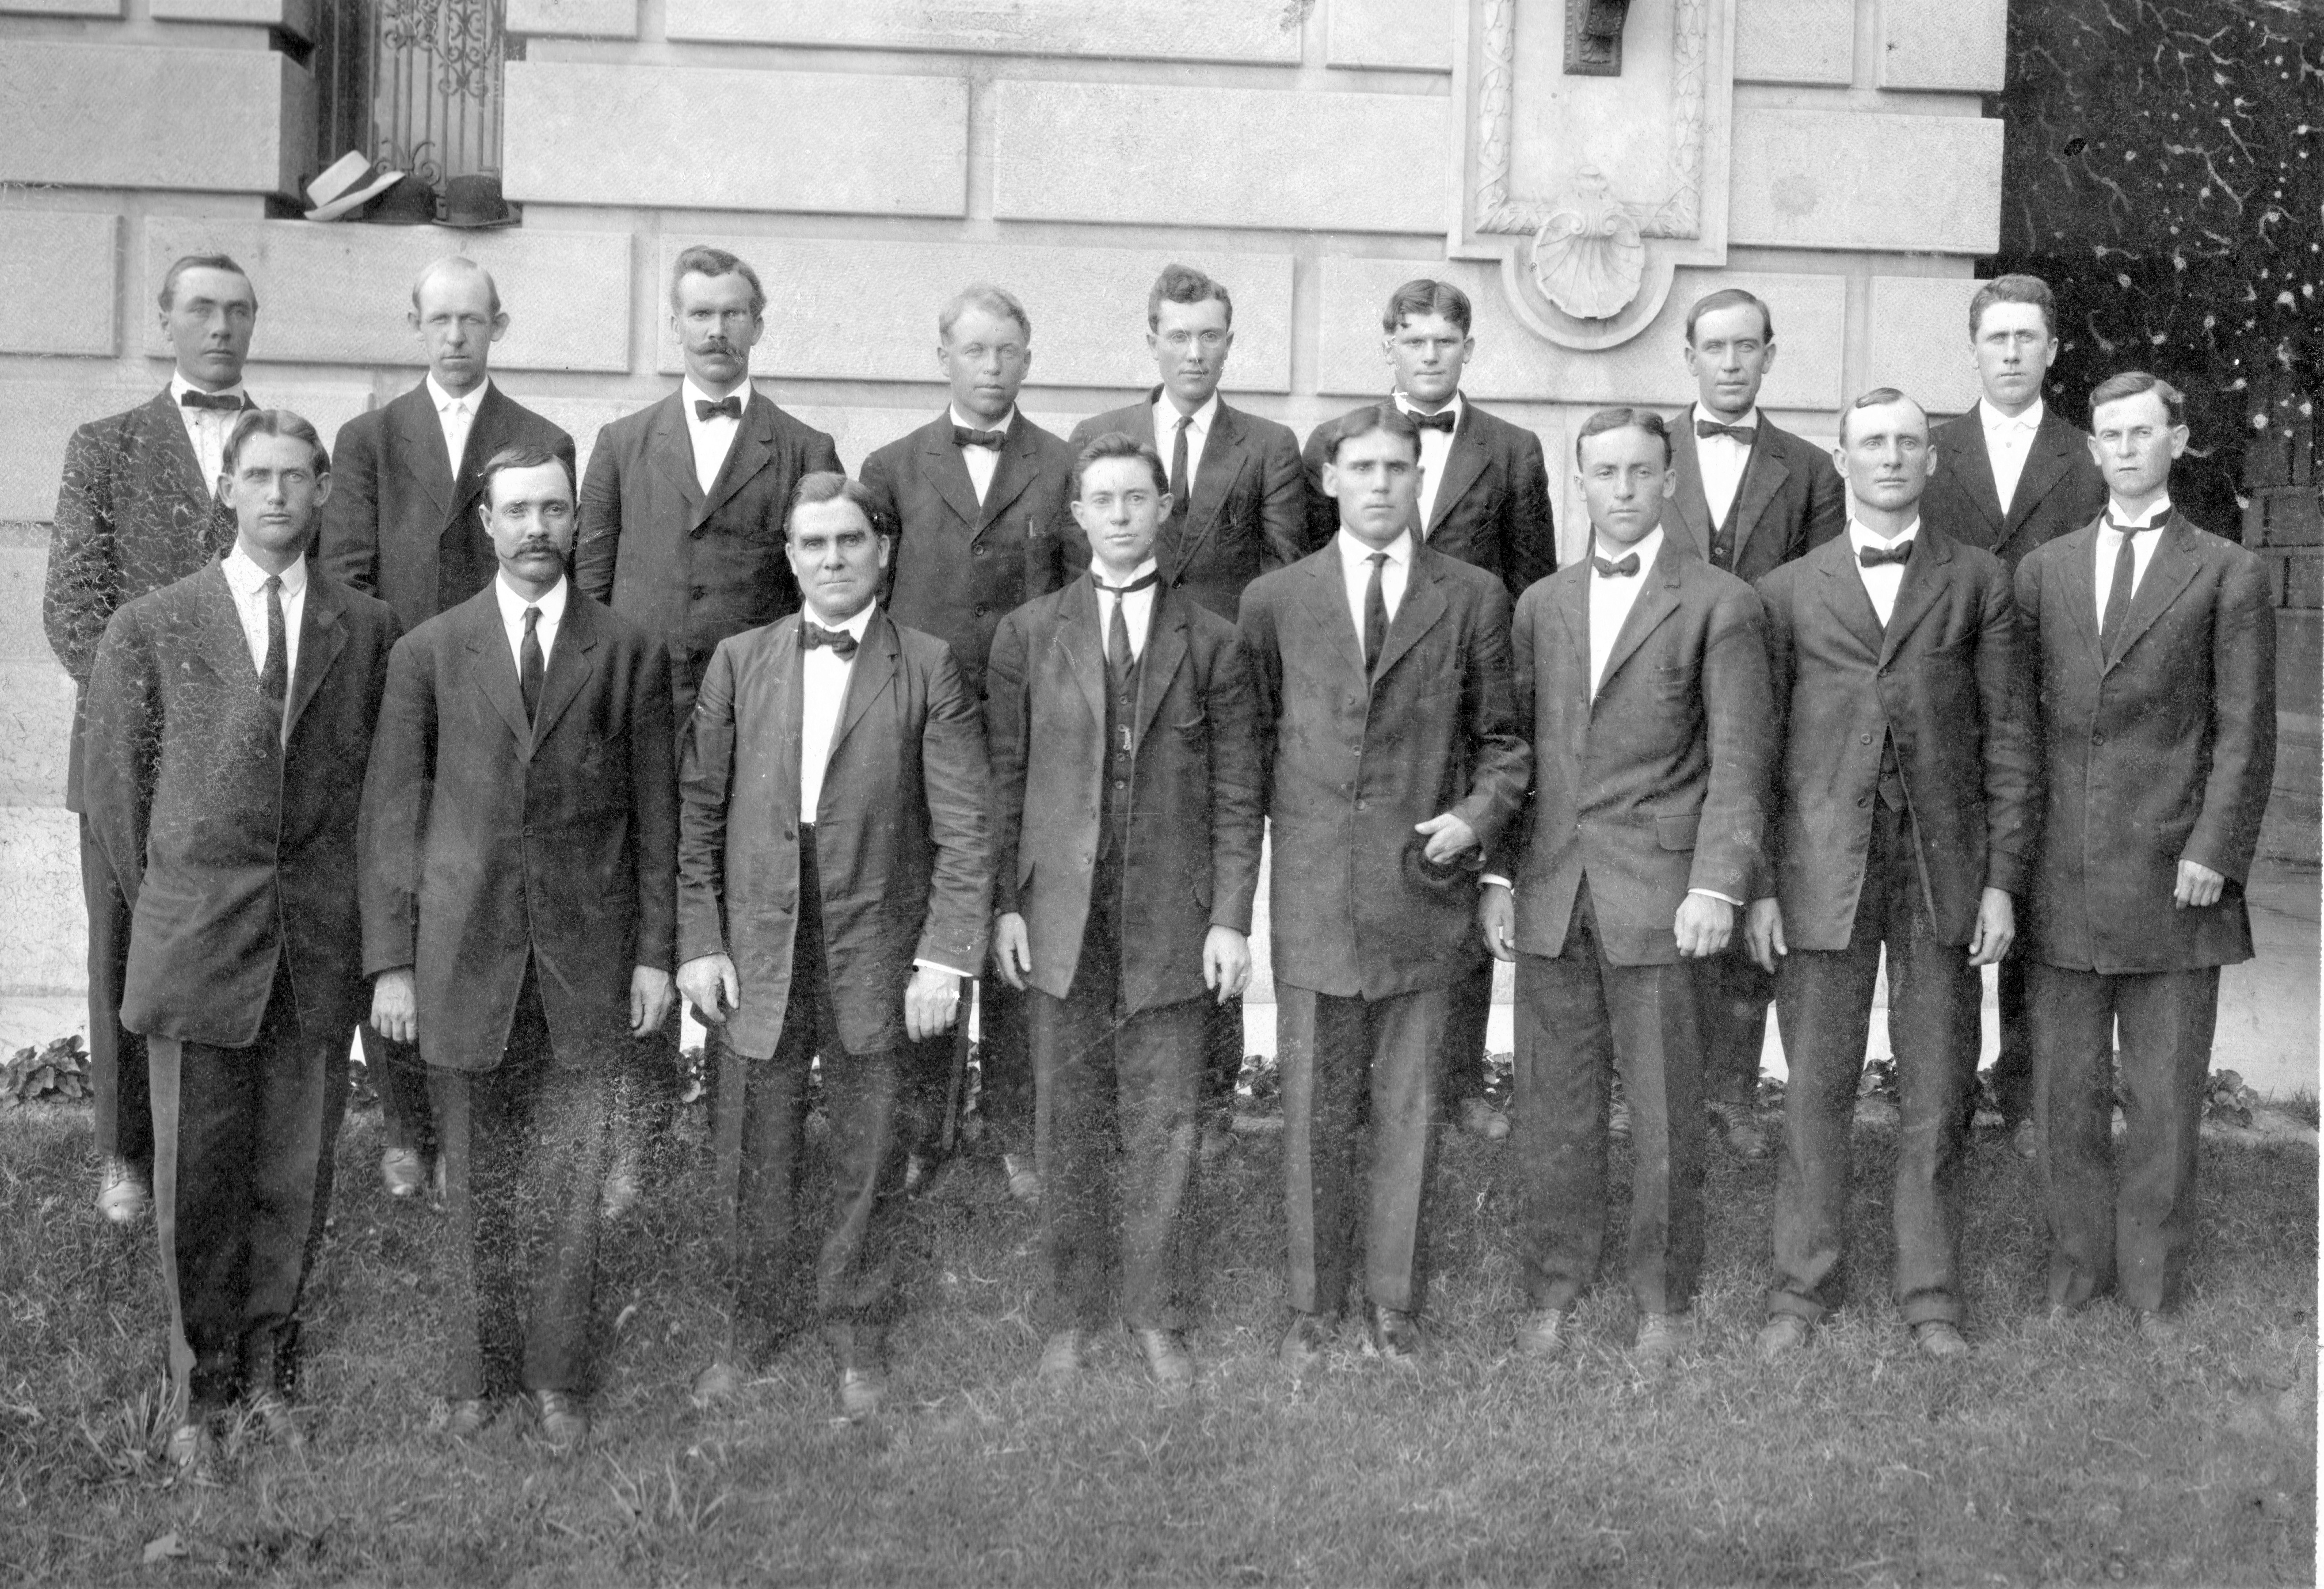 Southern States Mission Conference, Jackson Mississippi, Between 1011 May 23 – 1911 May 24